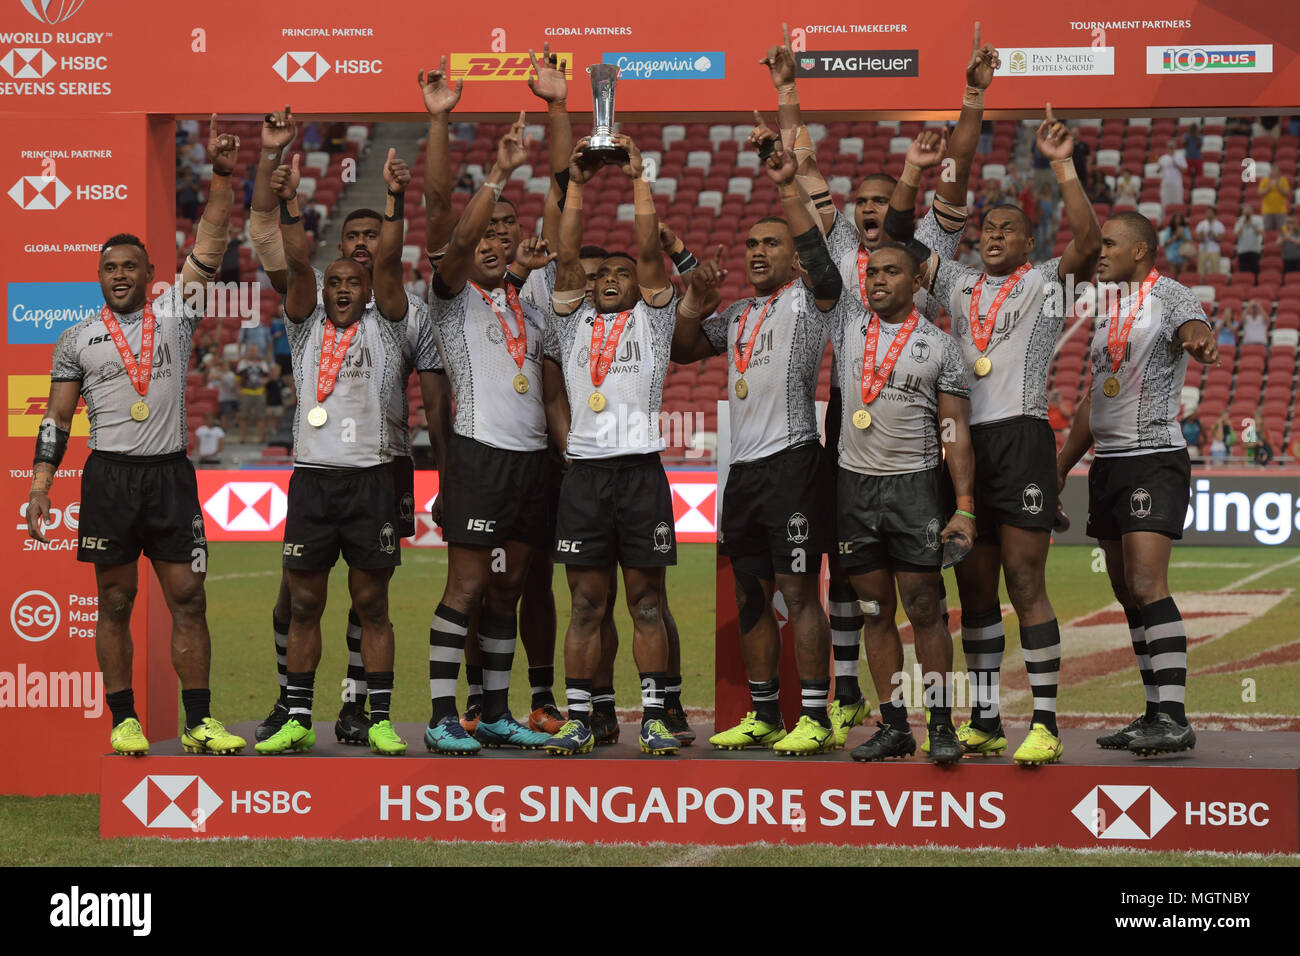 Singapore. 29th April 2018. Fiji's players lift the trophy after winning the final of the HSBC World Rugby Sevens Series Singapore Cup in Singapore, on April 29, 2018. Credit: Then Chih Wey/Xinhua/Alamy Live News Stock Photo